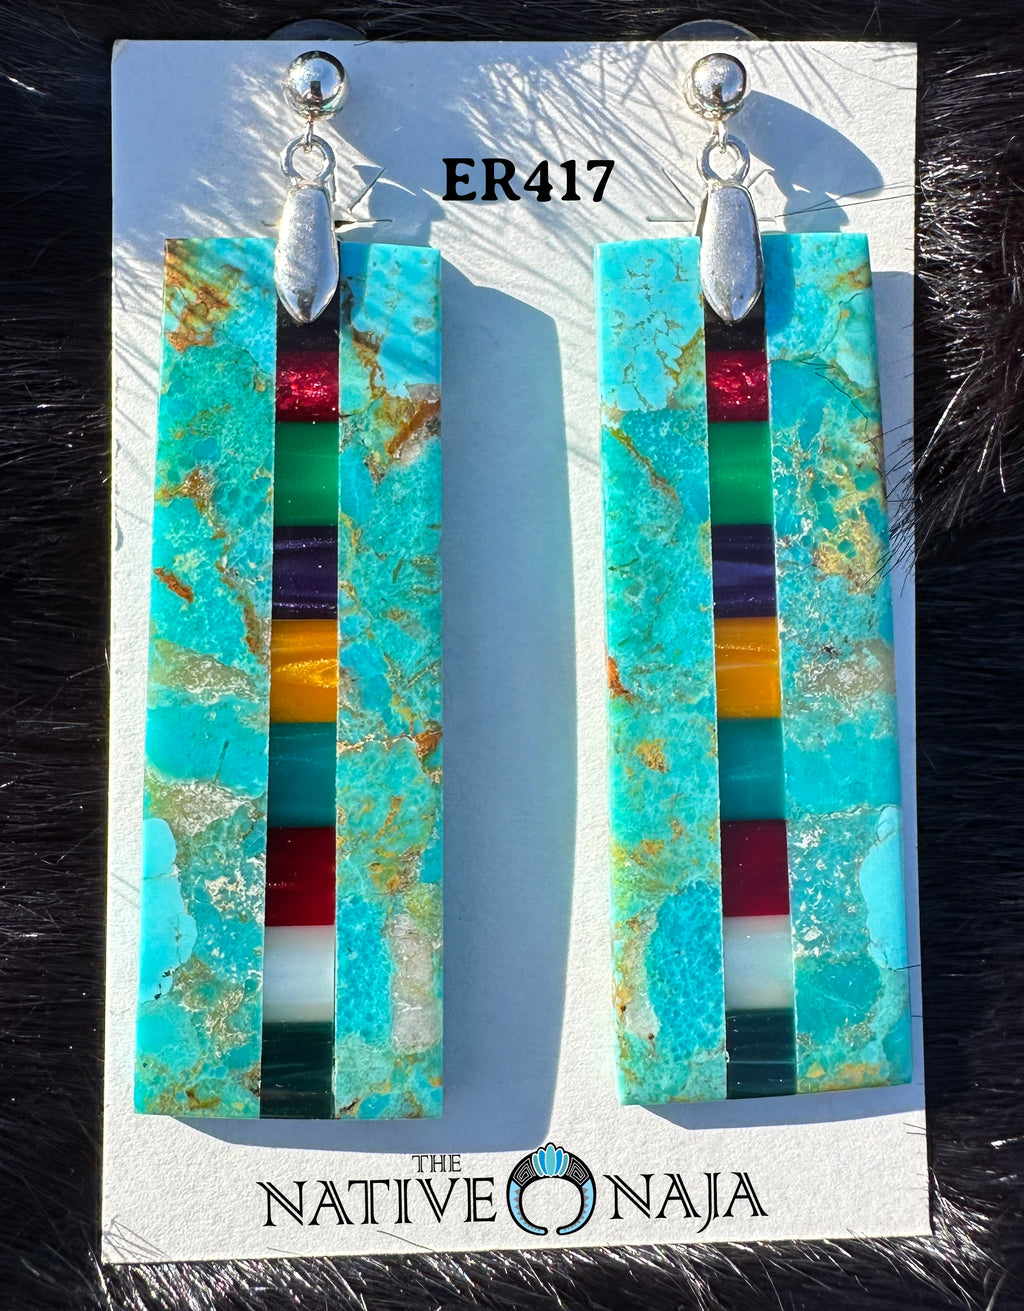 Uniquely Designed Composite Turquoise Slab Earrings by NM Artist Chris Wicketts ER417